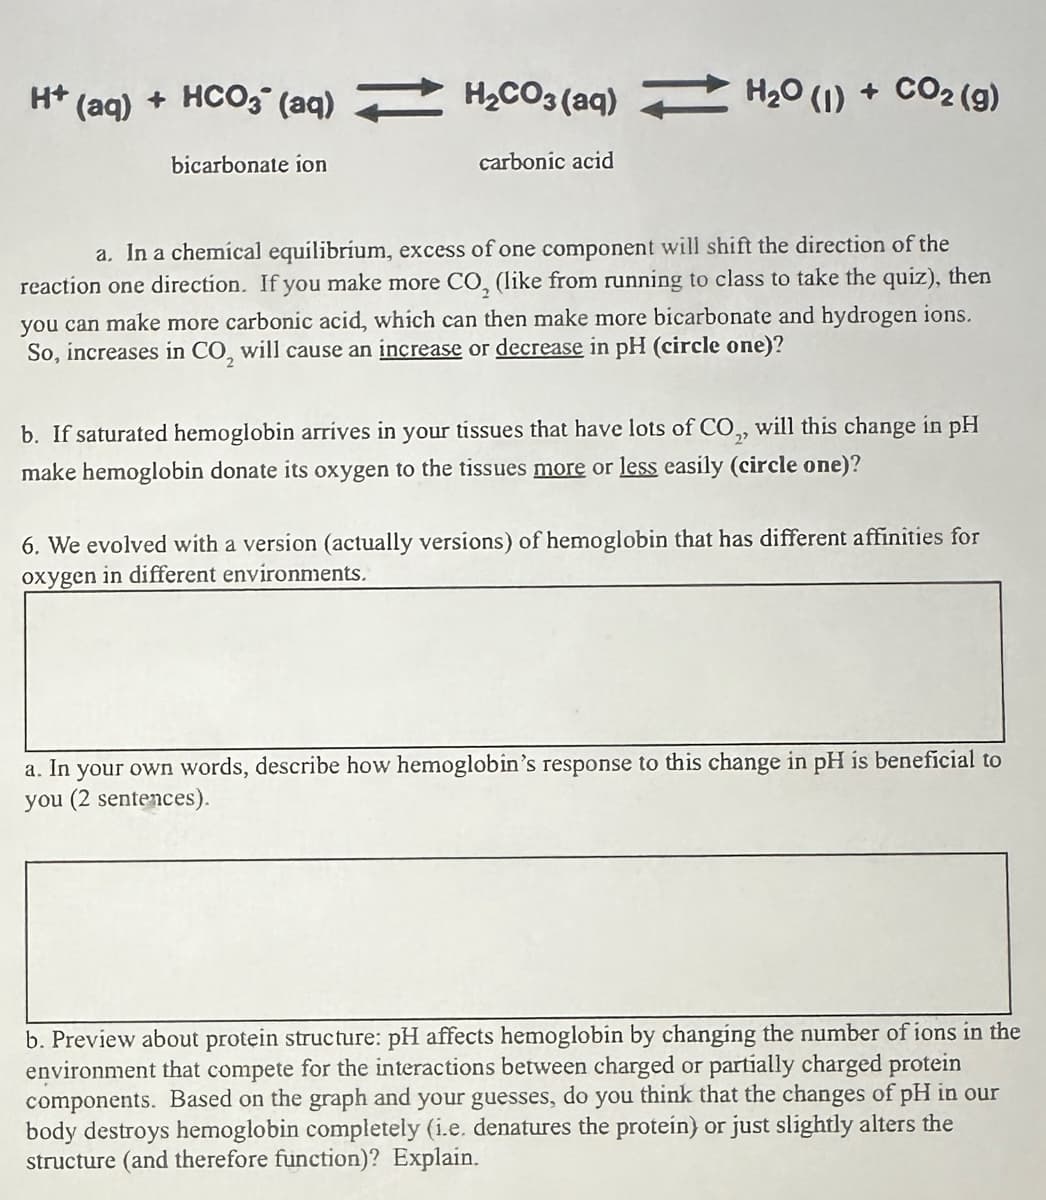 H+ (aq) + HCO3(aq) H₂CO3(aq) H₂0 (1) + CO2 (g)
bicarbonate ion
carbonic acid
a. In a chemical equilibrium, excess of one component will shift the direction of the
reaction one direction. If you make more CO₂ (like from running to class to take the quiz), then
you can make more carbonic acid, which can then make more bicarbonate and hydrogen ions.
So, increases in CO, will cause an increase or decrease in pH (circle one)?
b. If saturated hemoglobin arrives in your tissues that have lots of CO₂, will this change in pH
make hemoglobin donate its oxygen to the tissues more or less easily (circle one)?
6. We evolved with a version (actually versions) of hemoglobin that has different affinities for
oxygen in different environments.
a. In your own words, describe how hemoglobin's response to this change in pH is beneficial to
you (2 sentences).
b. Preview about protein structure: pH affects hemoglobin by changing the number of ions in the
environment that compete for the interactions between charged or partially charged protein
components. Based on the graph and your guesses, do you think that the changes of pH in our
body destroys hemoglobin completely (i.e. denatures the protein) or just slightly alters the
structure (and therefore function)? Explain.